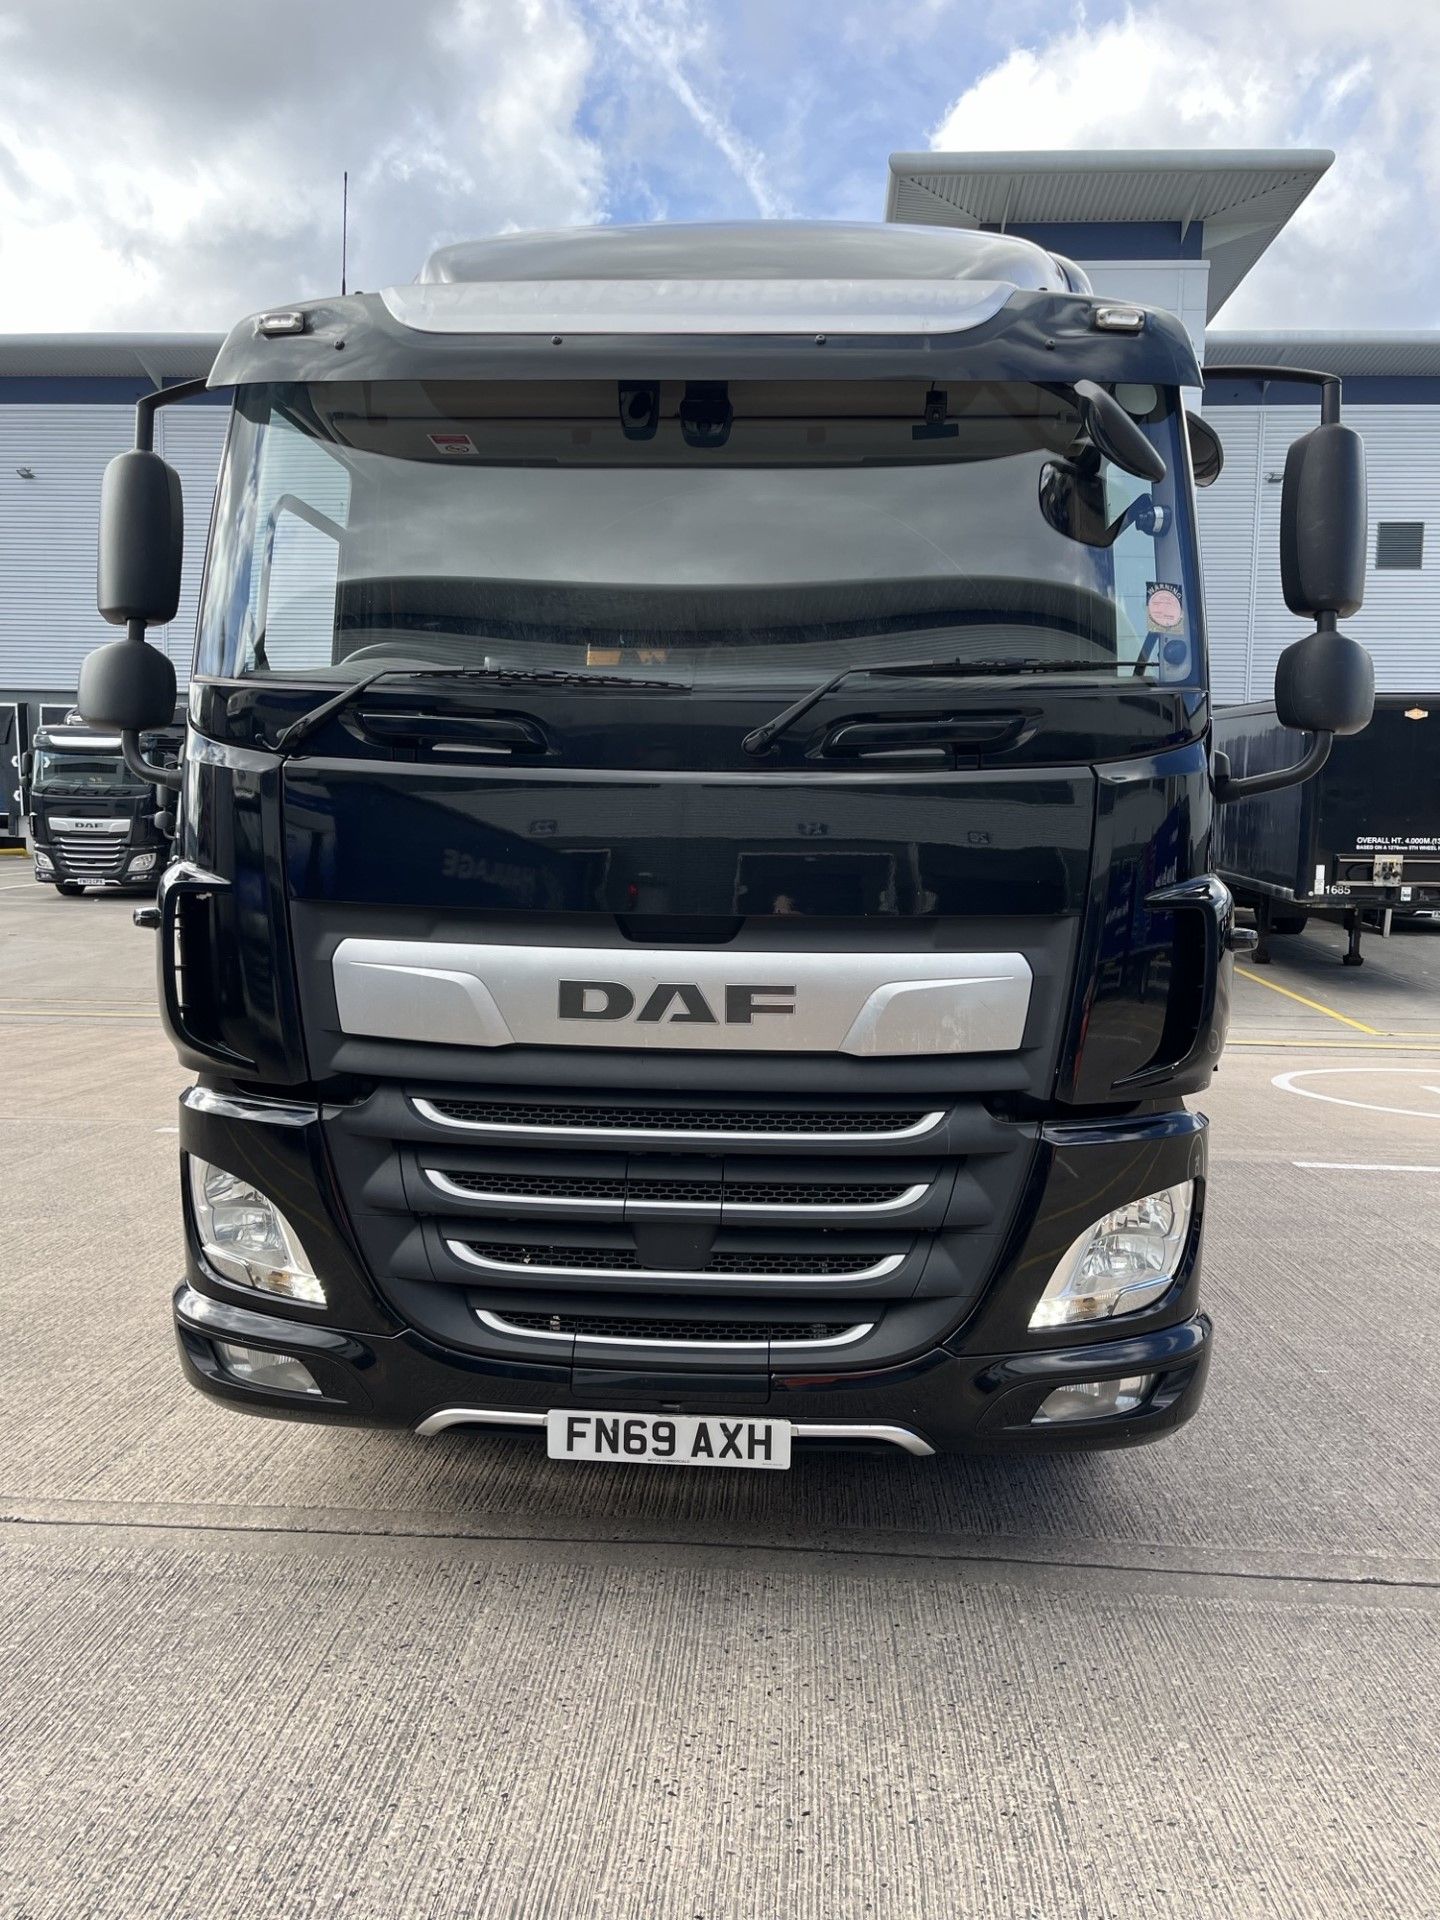 2019, DAF CF 260 FA (Ex-Fleet Owned & Maintained) - FN69 AXH (18 Ton Rigid Truck with Tail Lift) - Image 3 of 22